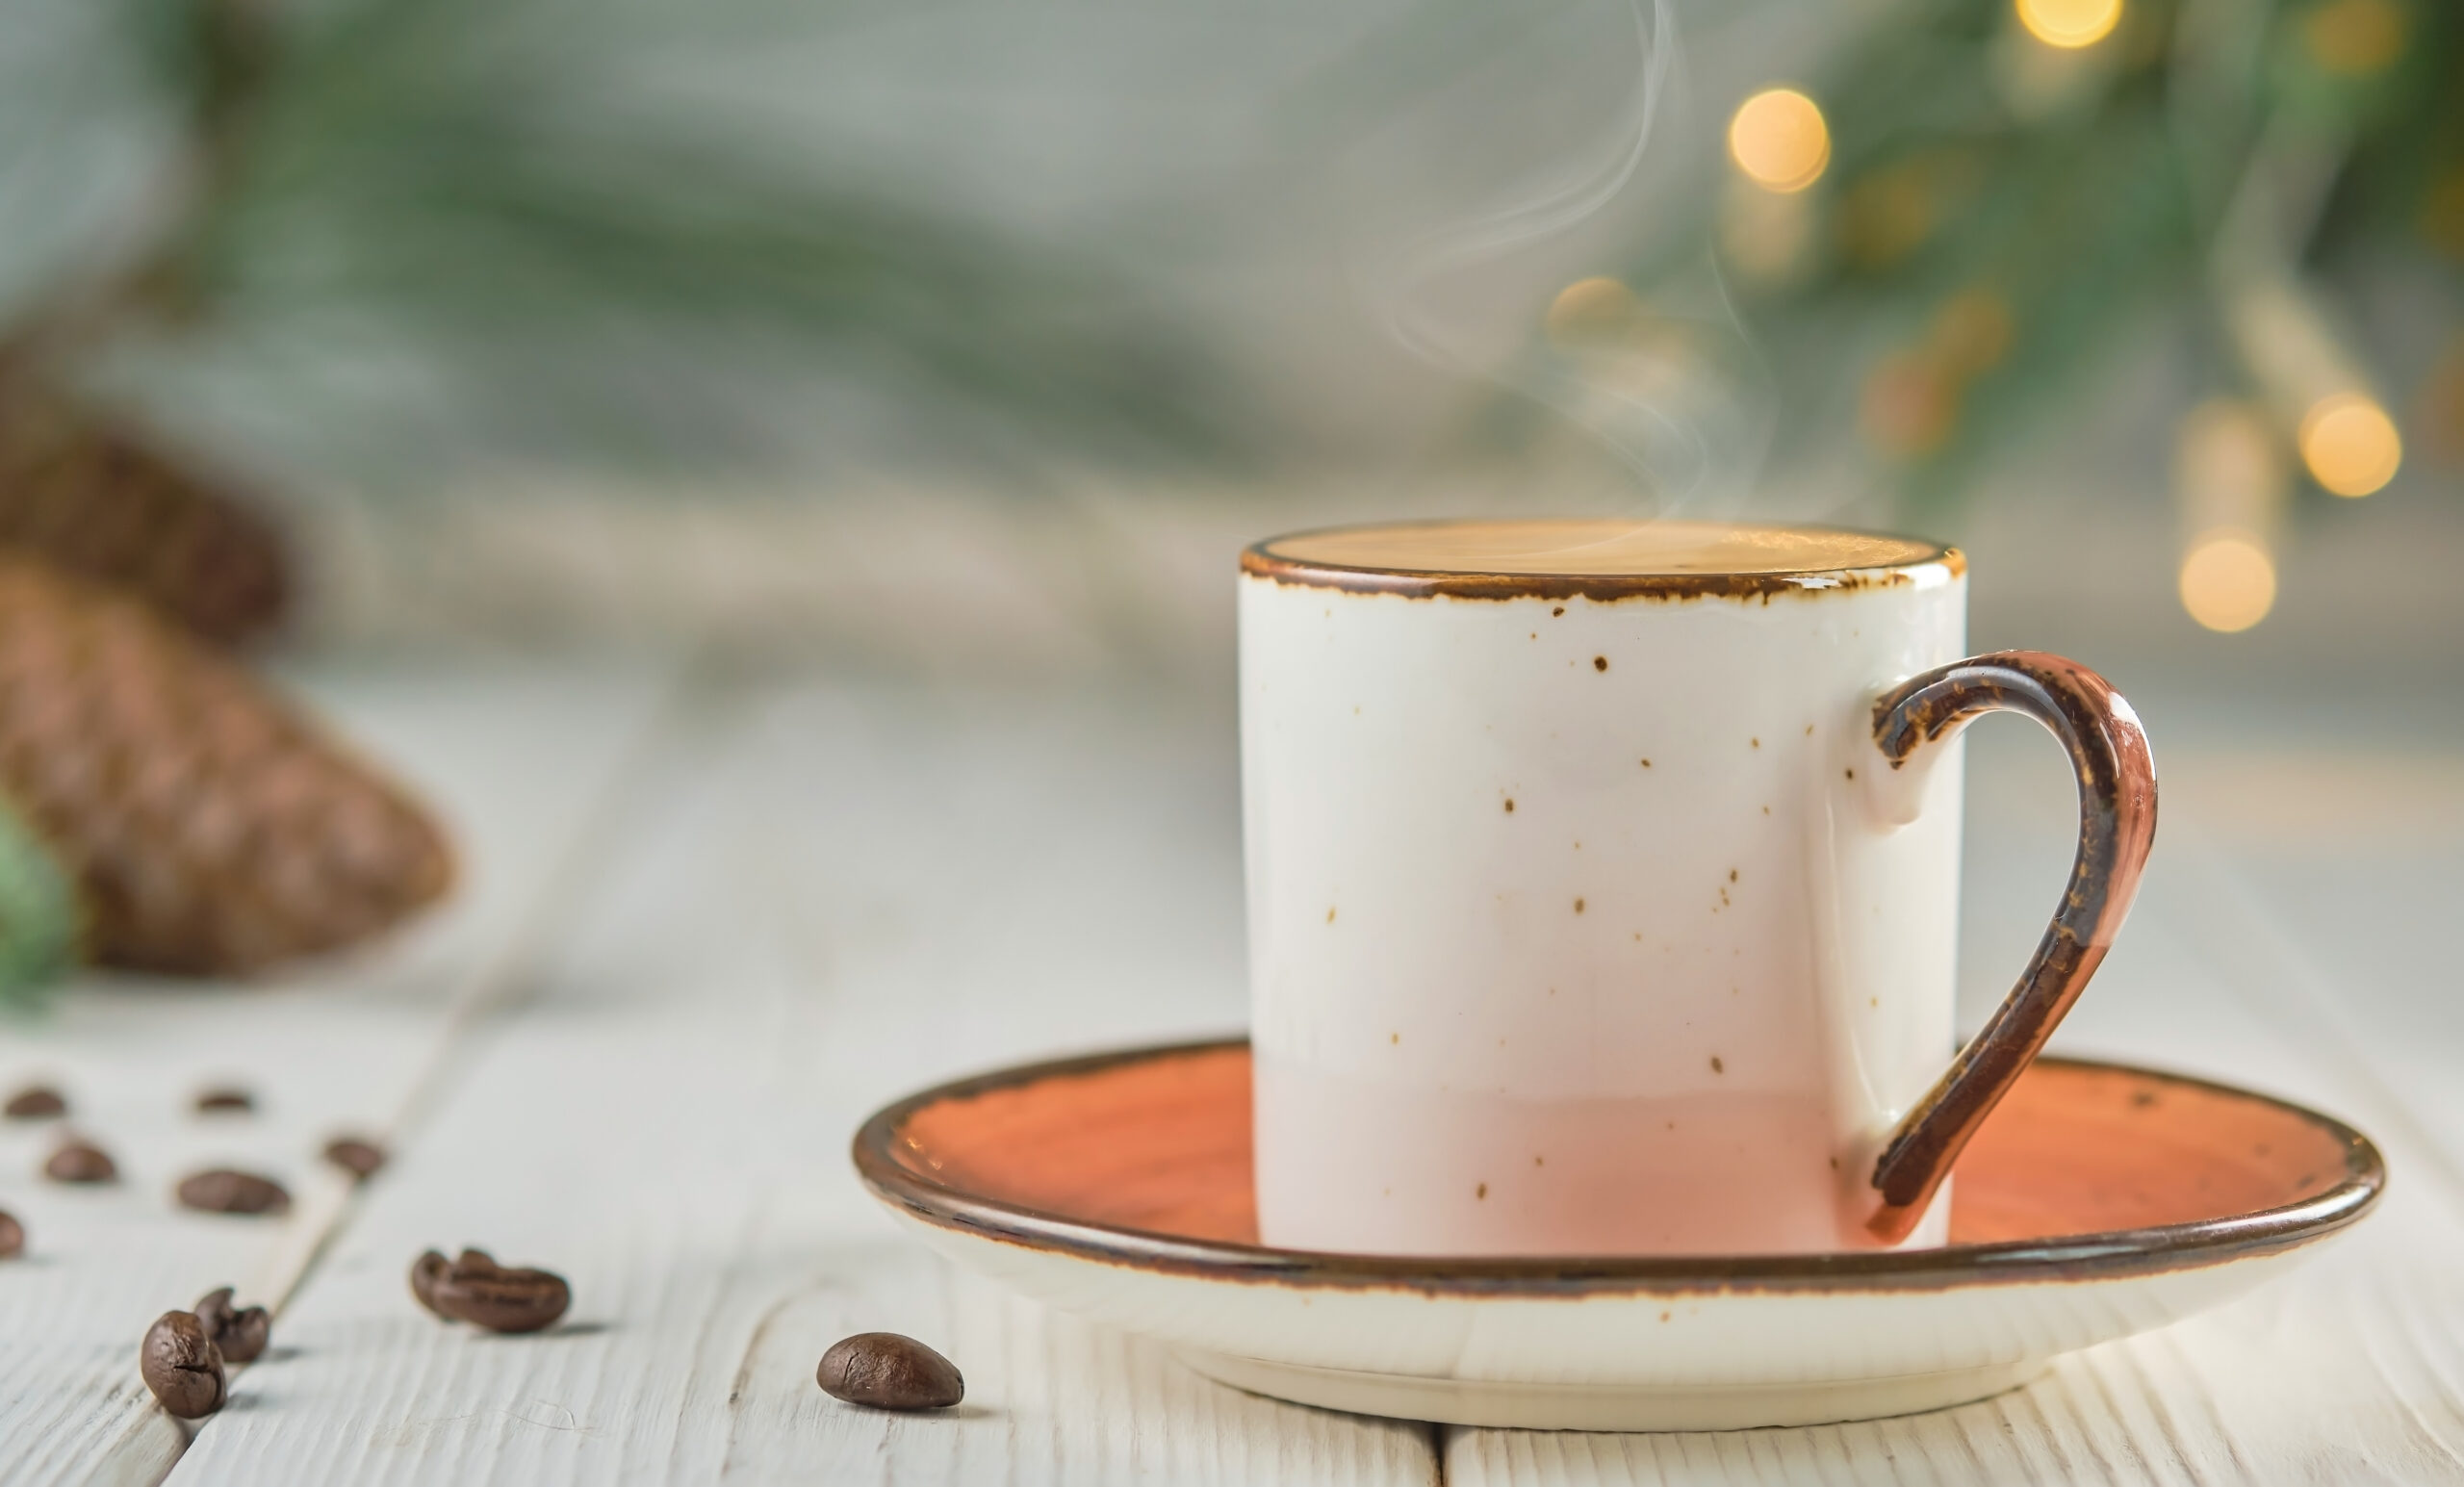 Cup of coffee with natural steam on a white wooden table, selective focus. christmas background with copy space. hot coffee drink concept. christmas tree with a garland on the table. new year concept